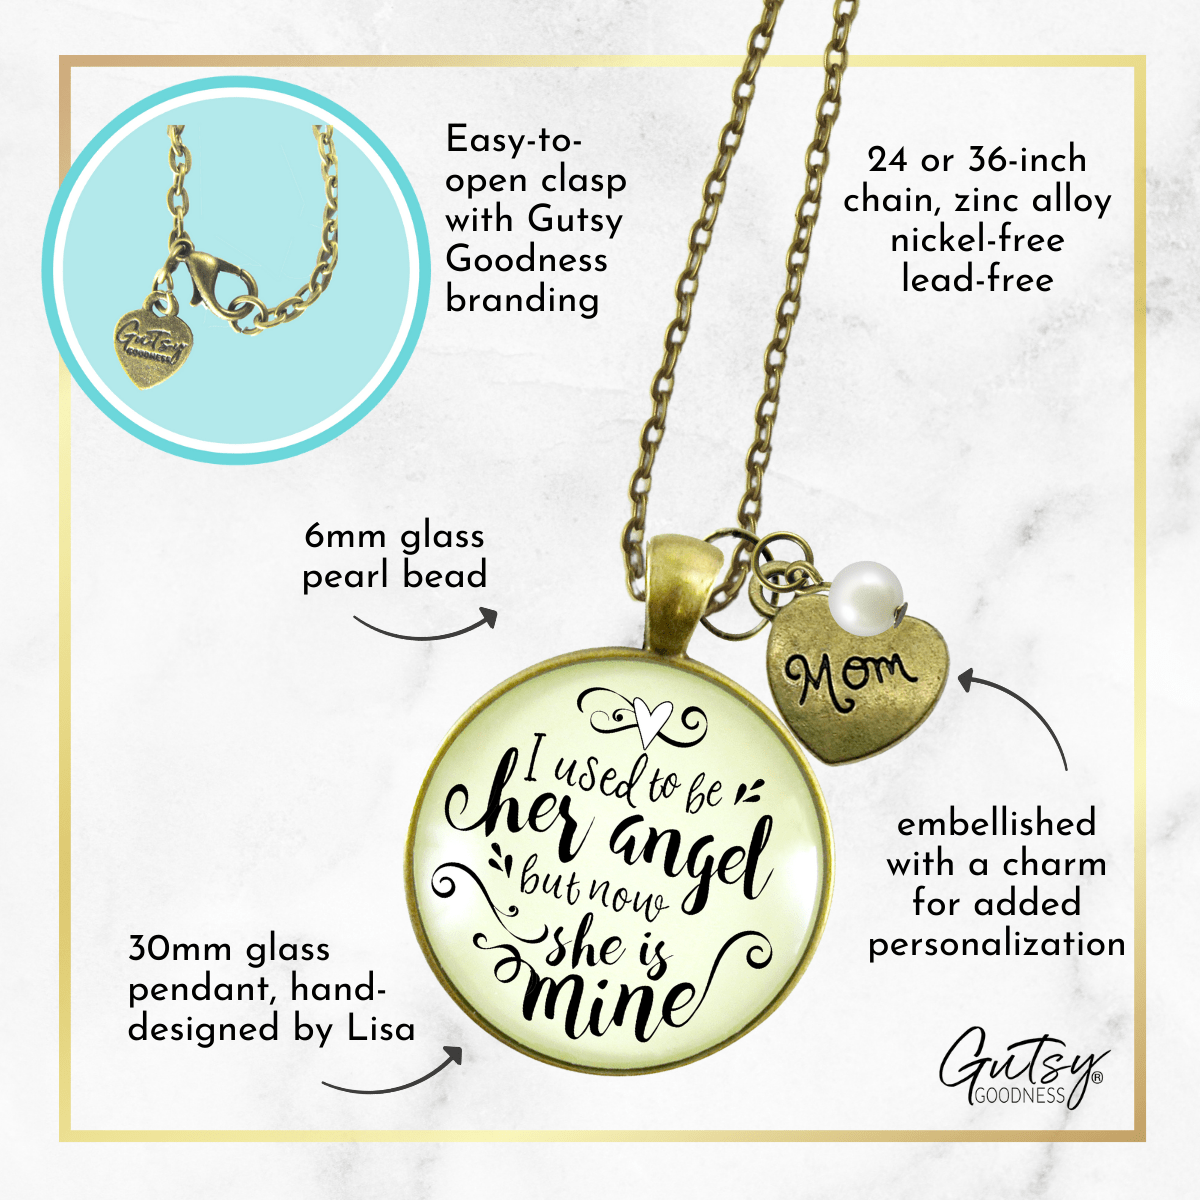 Gutsy Goodness Mom Memorial Necklace Used to be Her Angel Mother Remembrance Jewelry Gift - Gutsy Goodness;Mom Memorial Necklace Used To Be Her Angel Mother Remembrance Jewelry Gift - Gutsy Goodness Handmade Jewelry Gifts